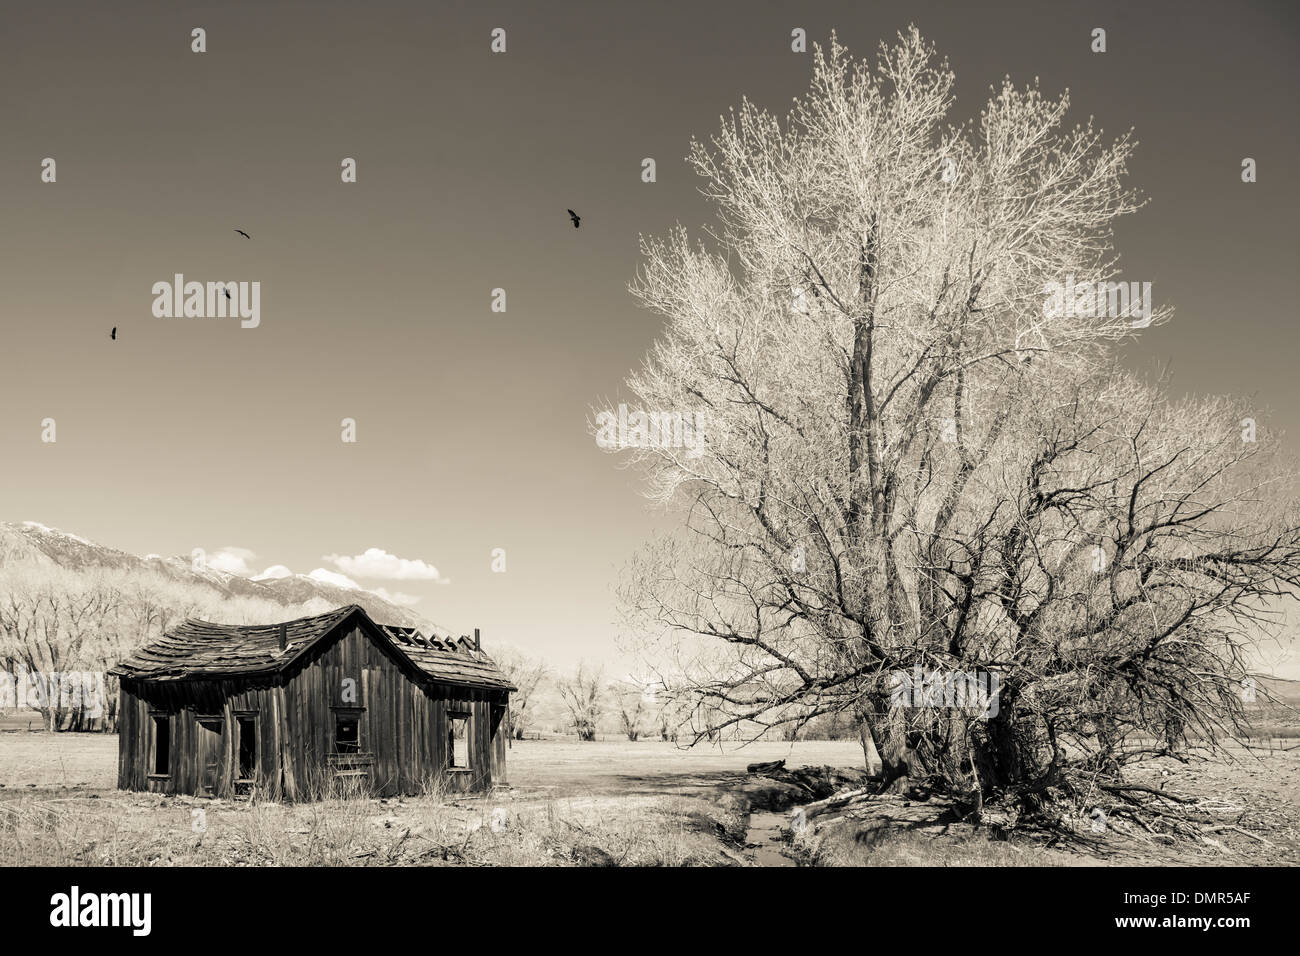 Abandoned homestead with circling birds in black and white for a vintage look. Stock Photo